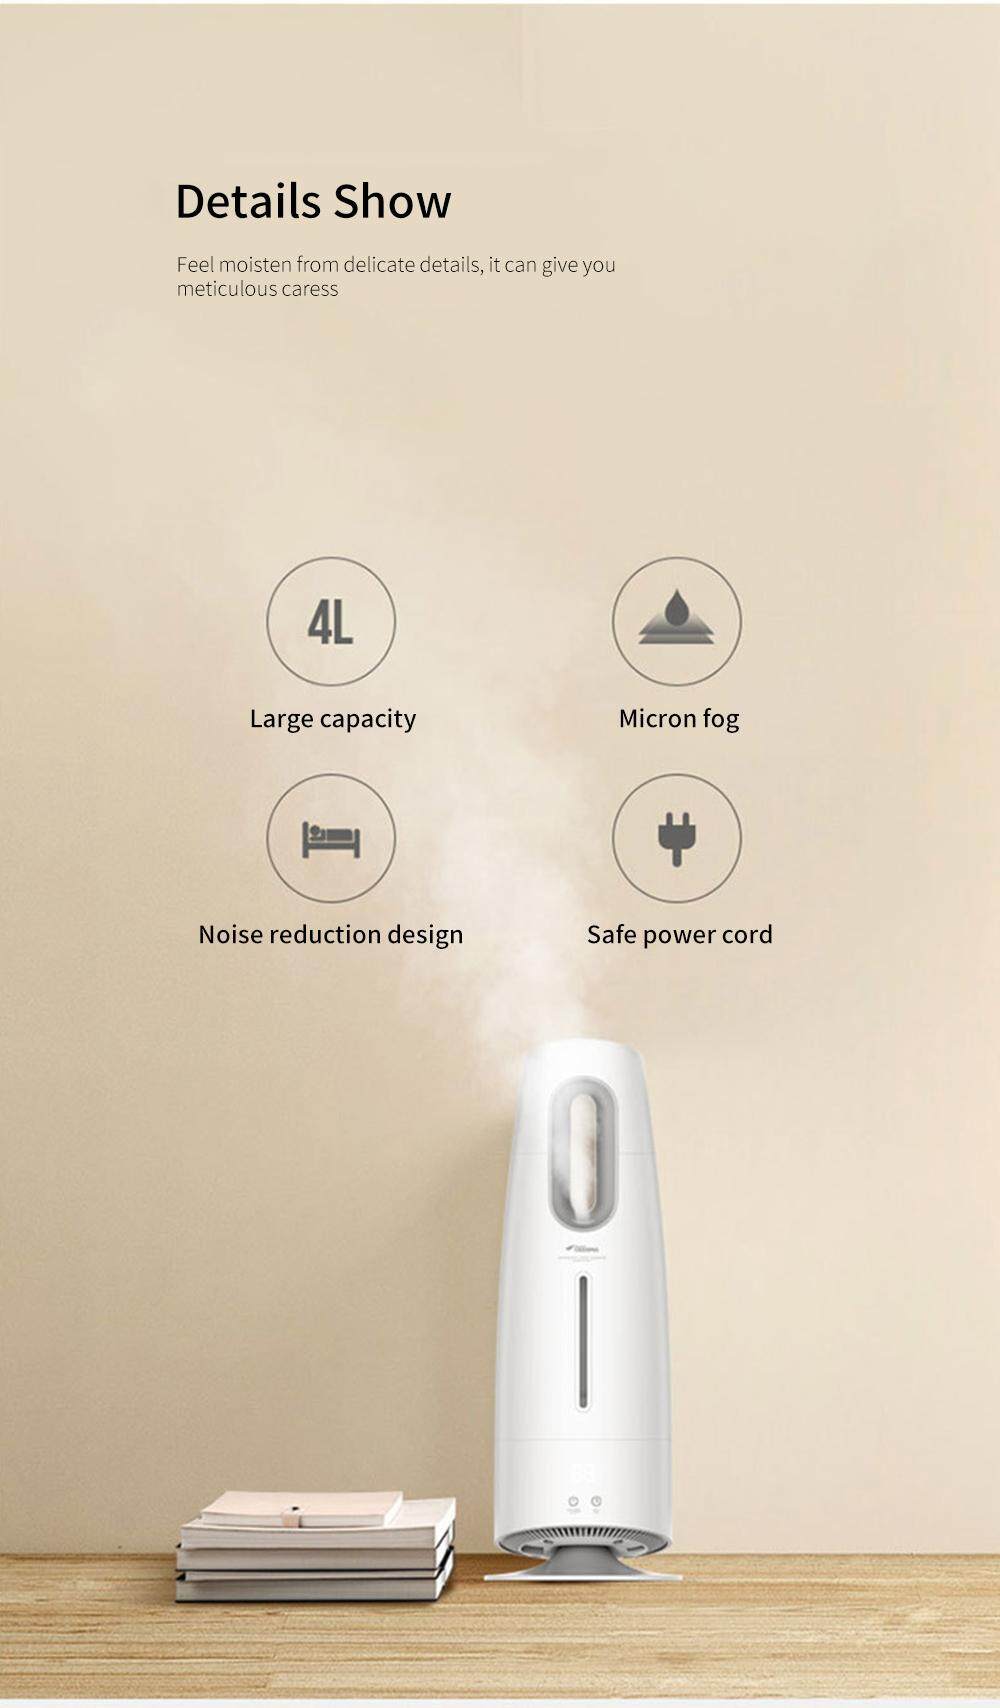 DEERMA DEM - LD700 Mist Humidifier 4L Air Purifying for Air-conditioned Rooms Office